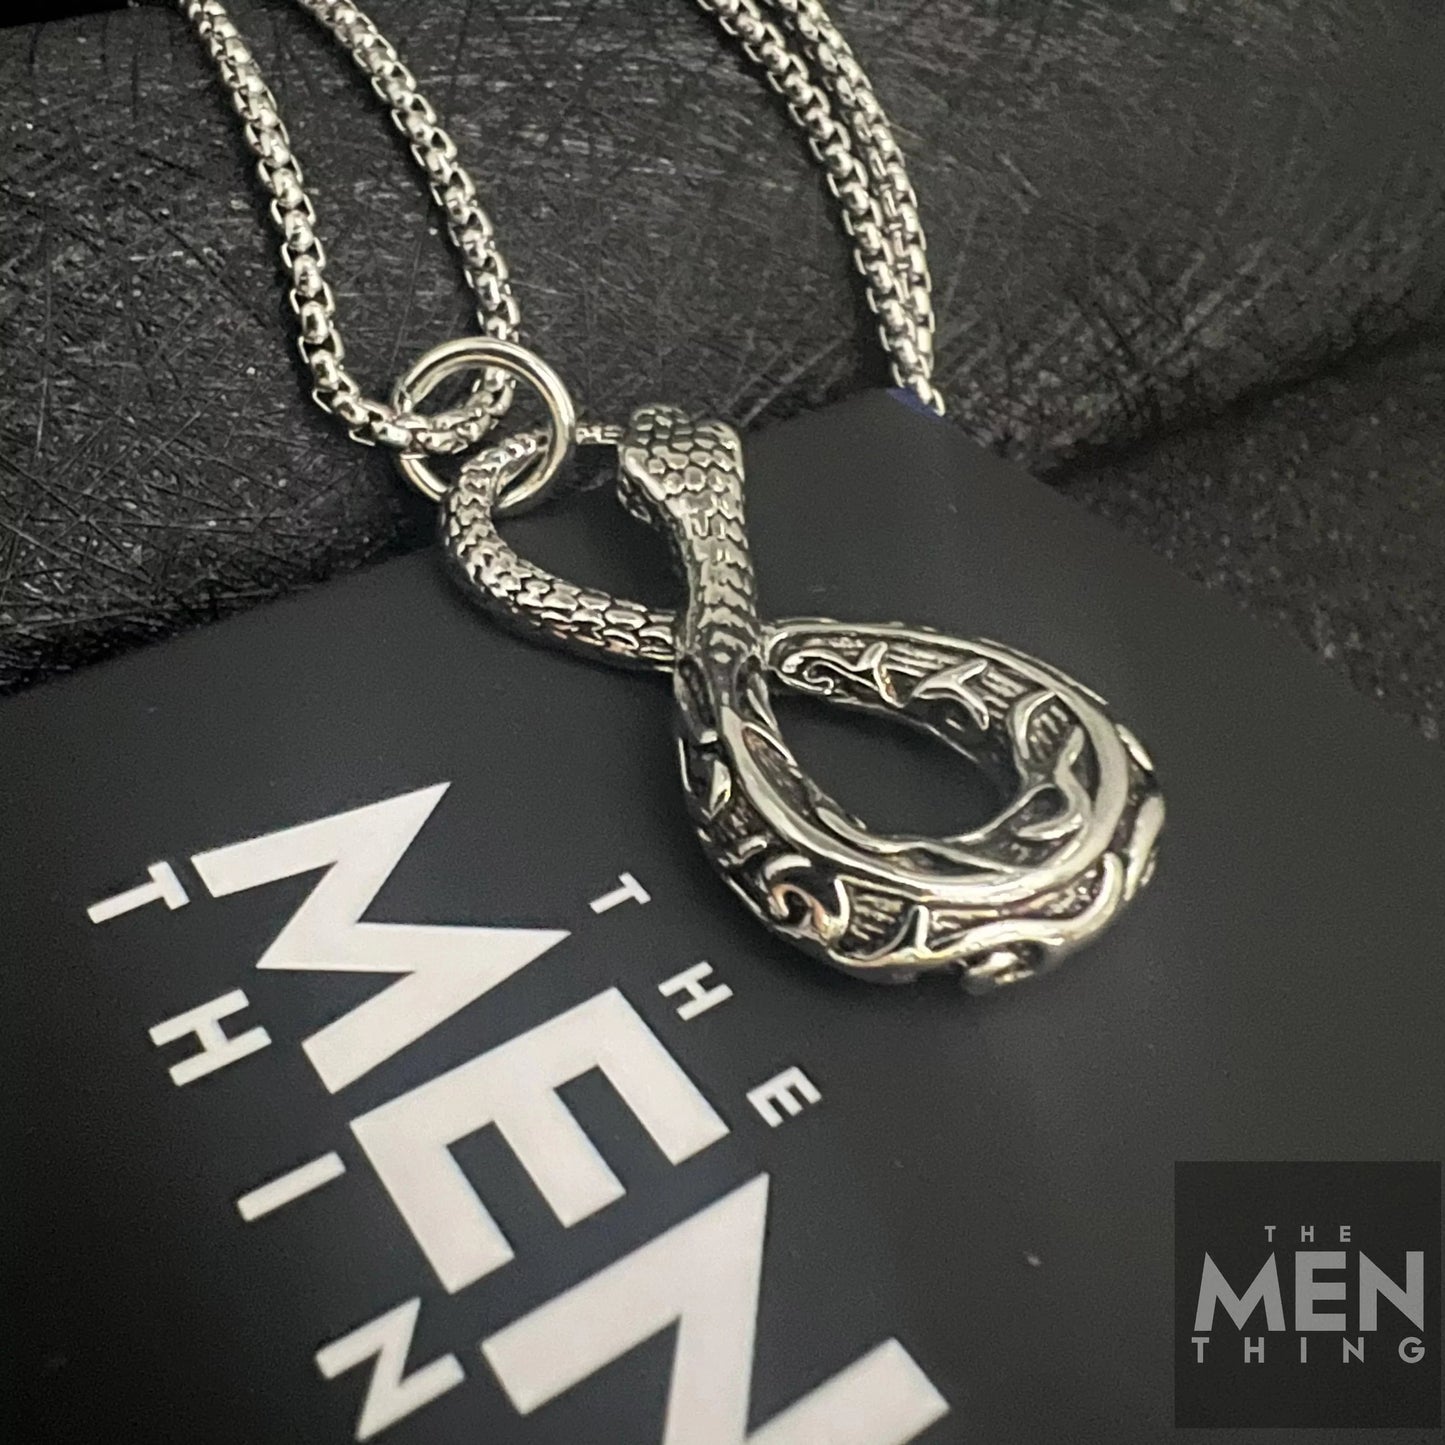 THE MEN THING Alloy Snake 8 Pendant with Pure Stainless Steel 24inch Chain for Men, European trending Style - Round Box Chain & Pendant for Men & Boy